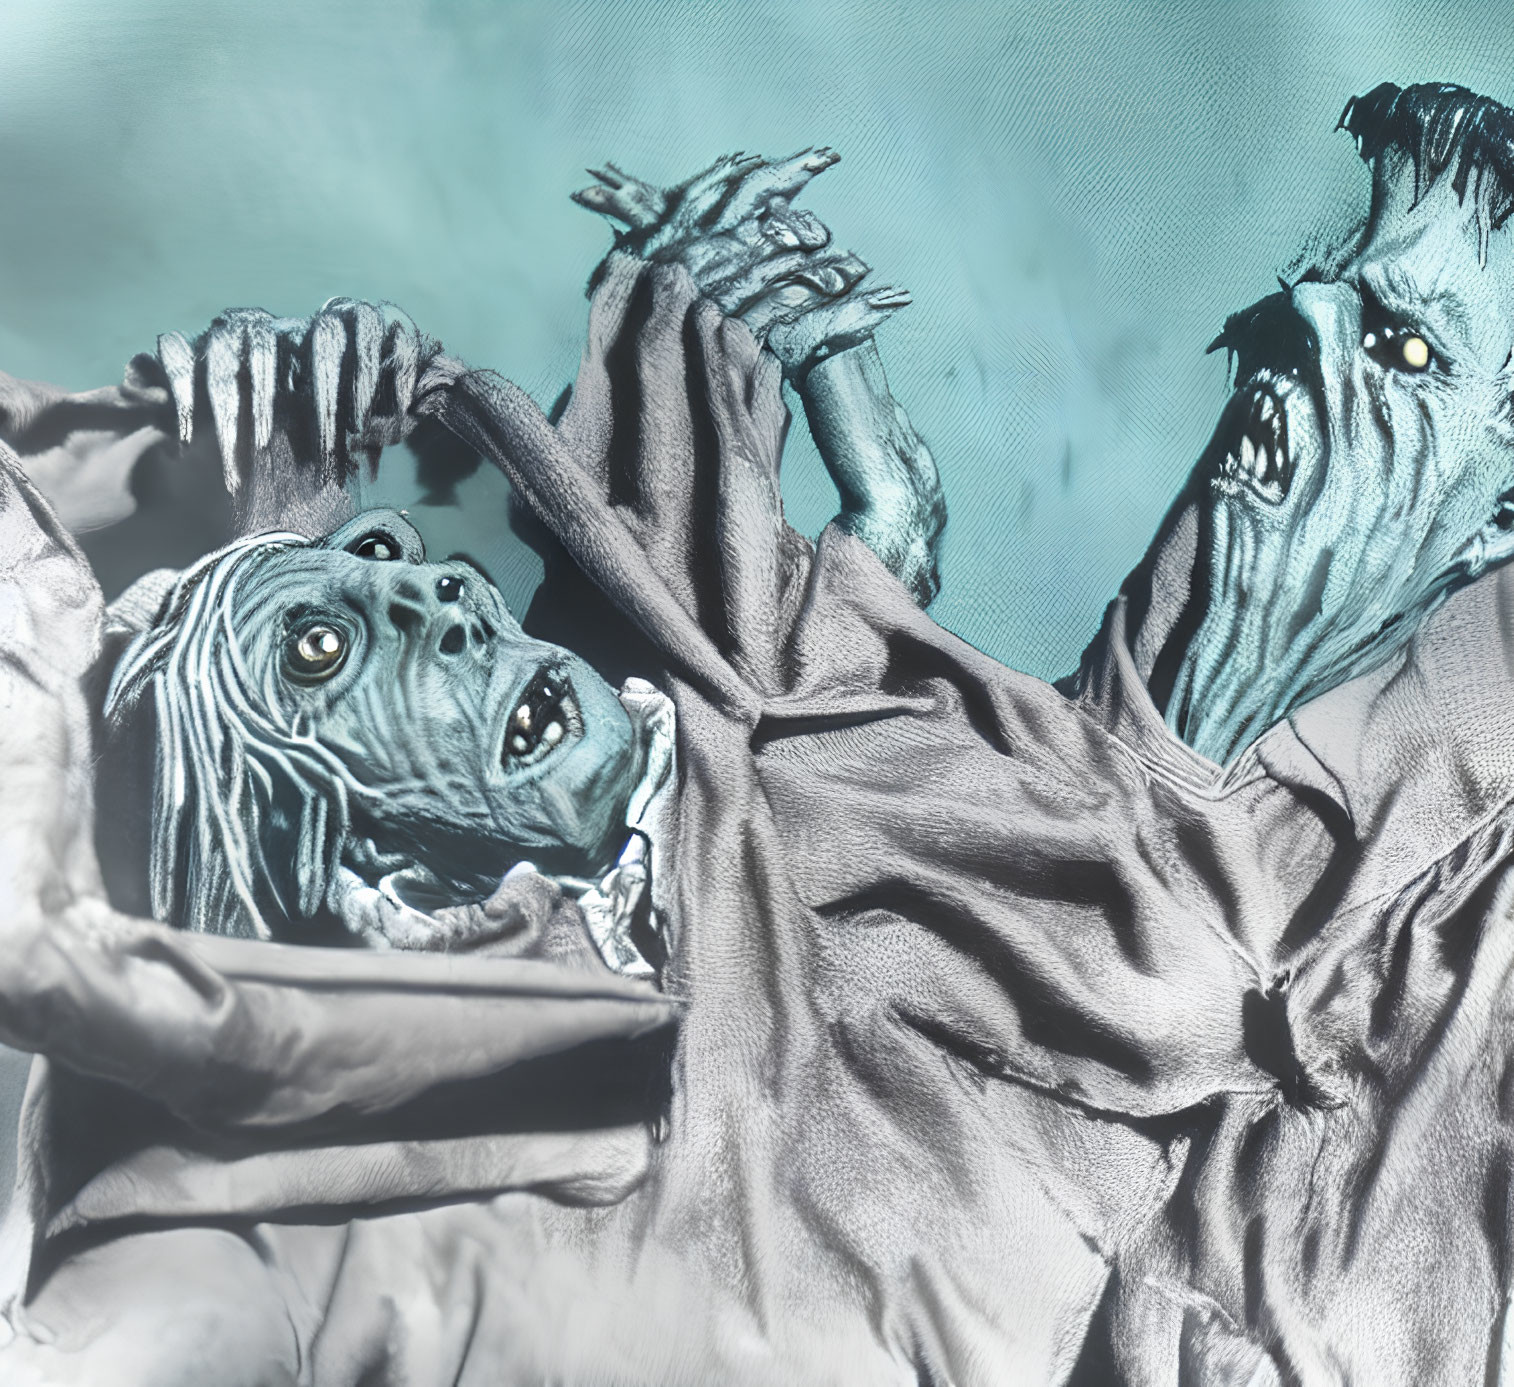 Dramatic theatrical zombie figures with clawed hands on teal backdrop